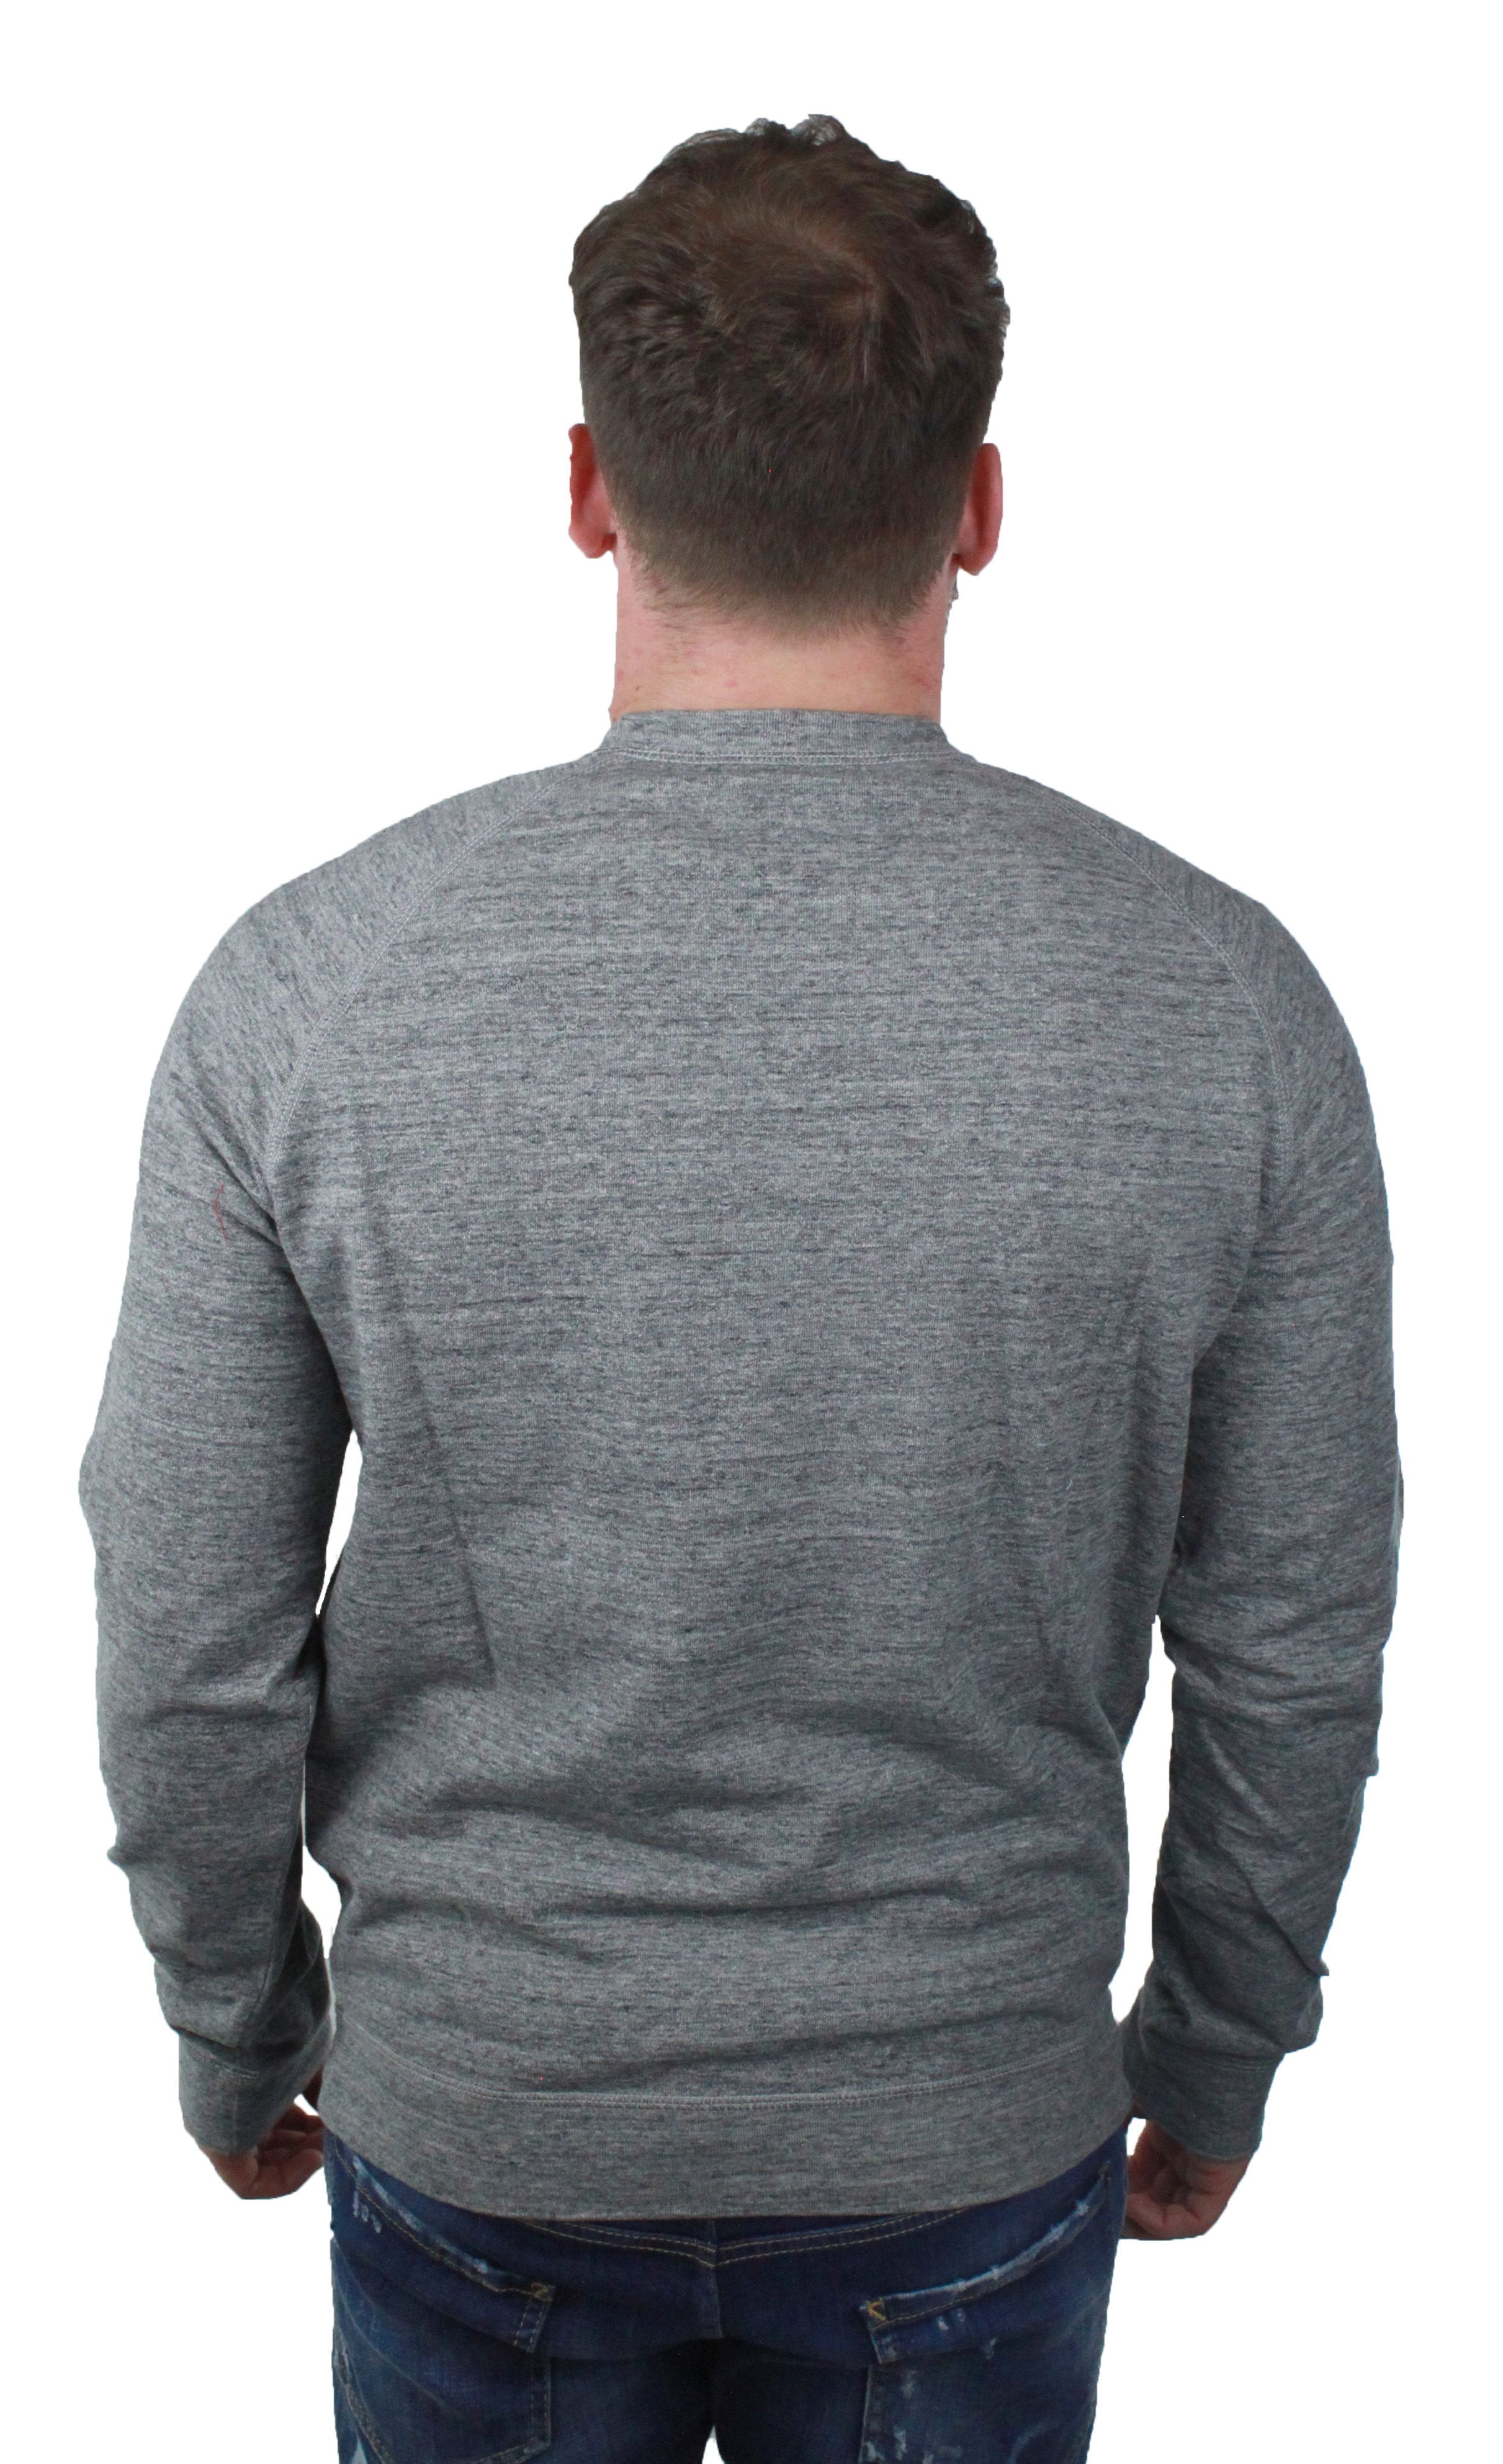 DSquared2 S74GU0176 860M Mens Jumper. DSquared2 Grey Jumper. 100% Cotton. Large Brand Motif. Made In Italy. Elasticated Sleeve and Waist Endings